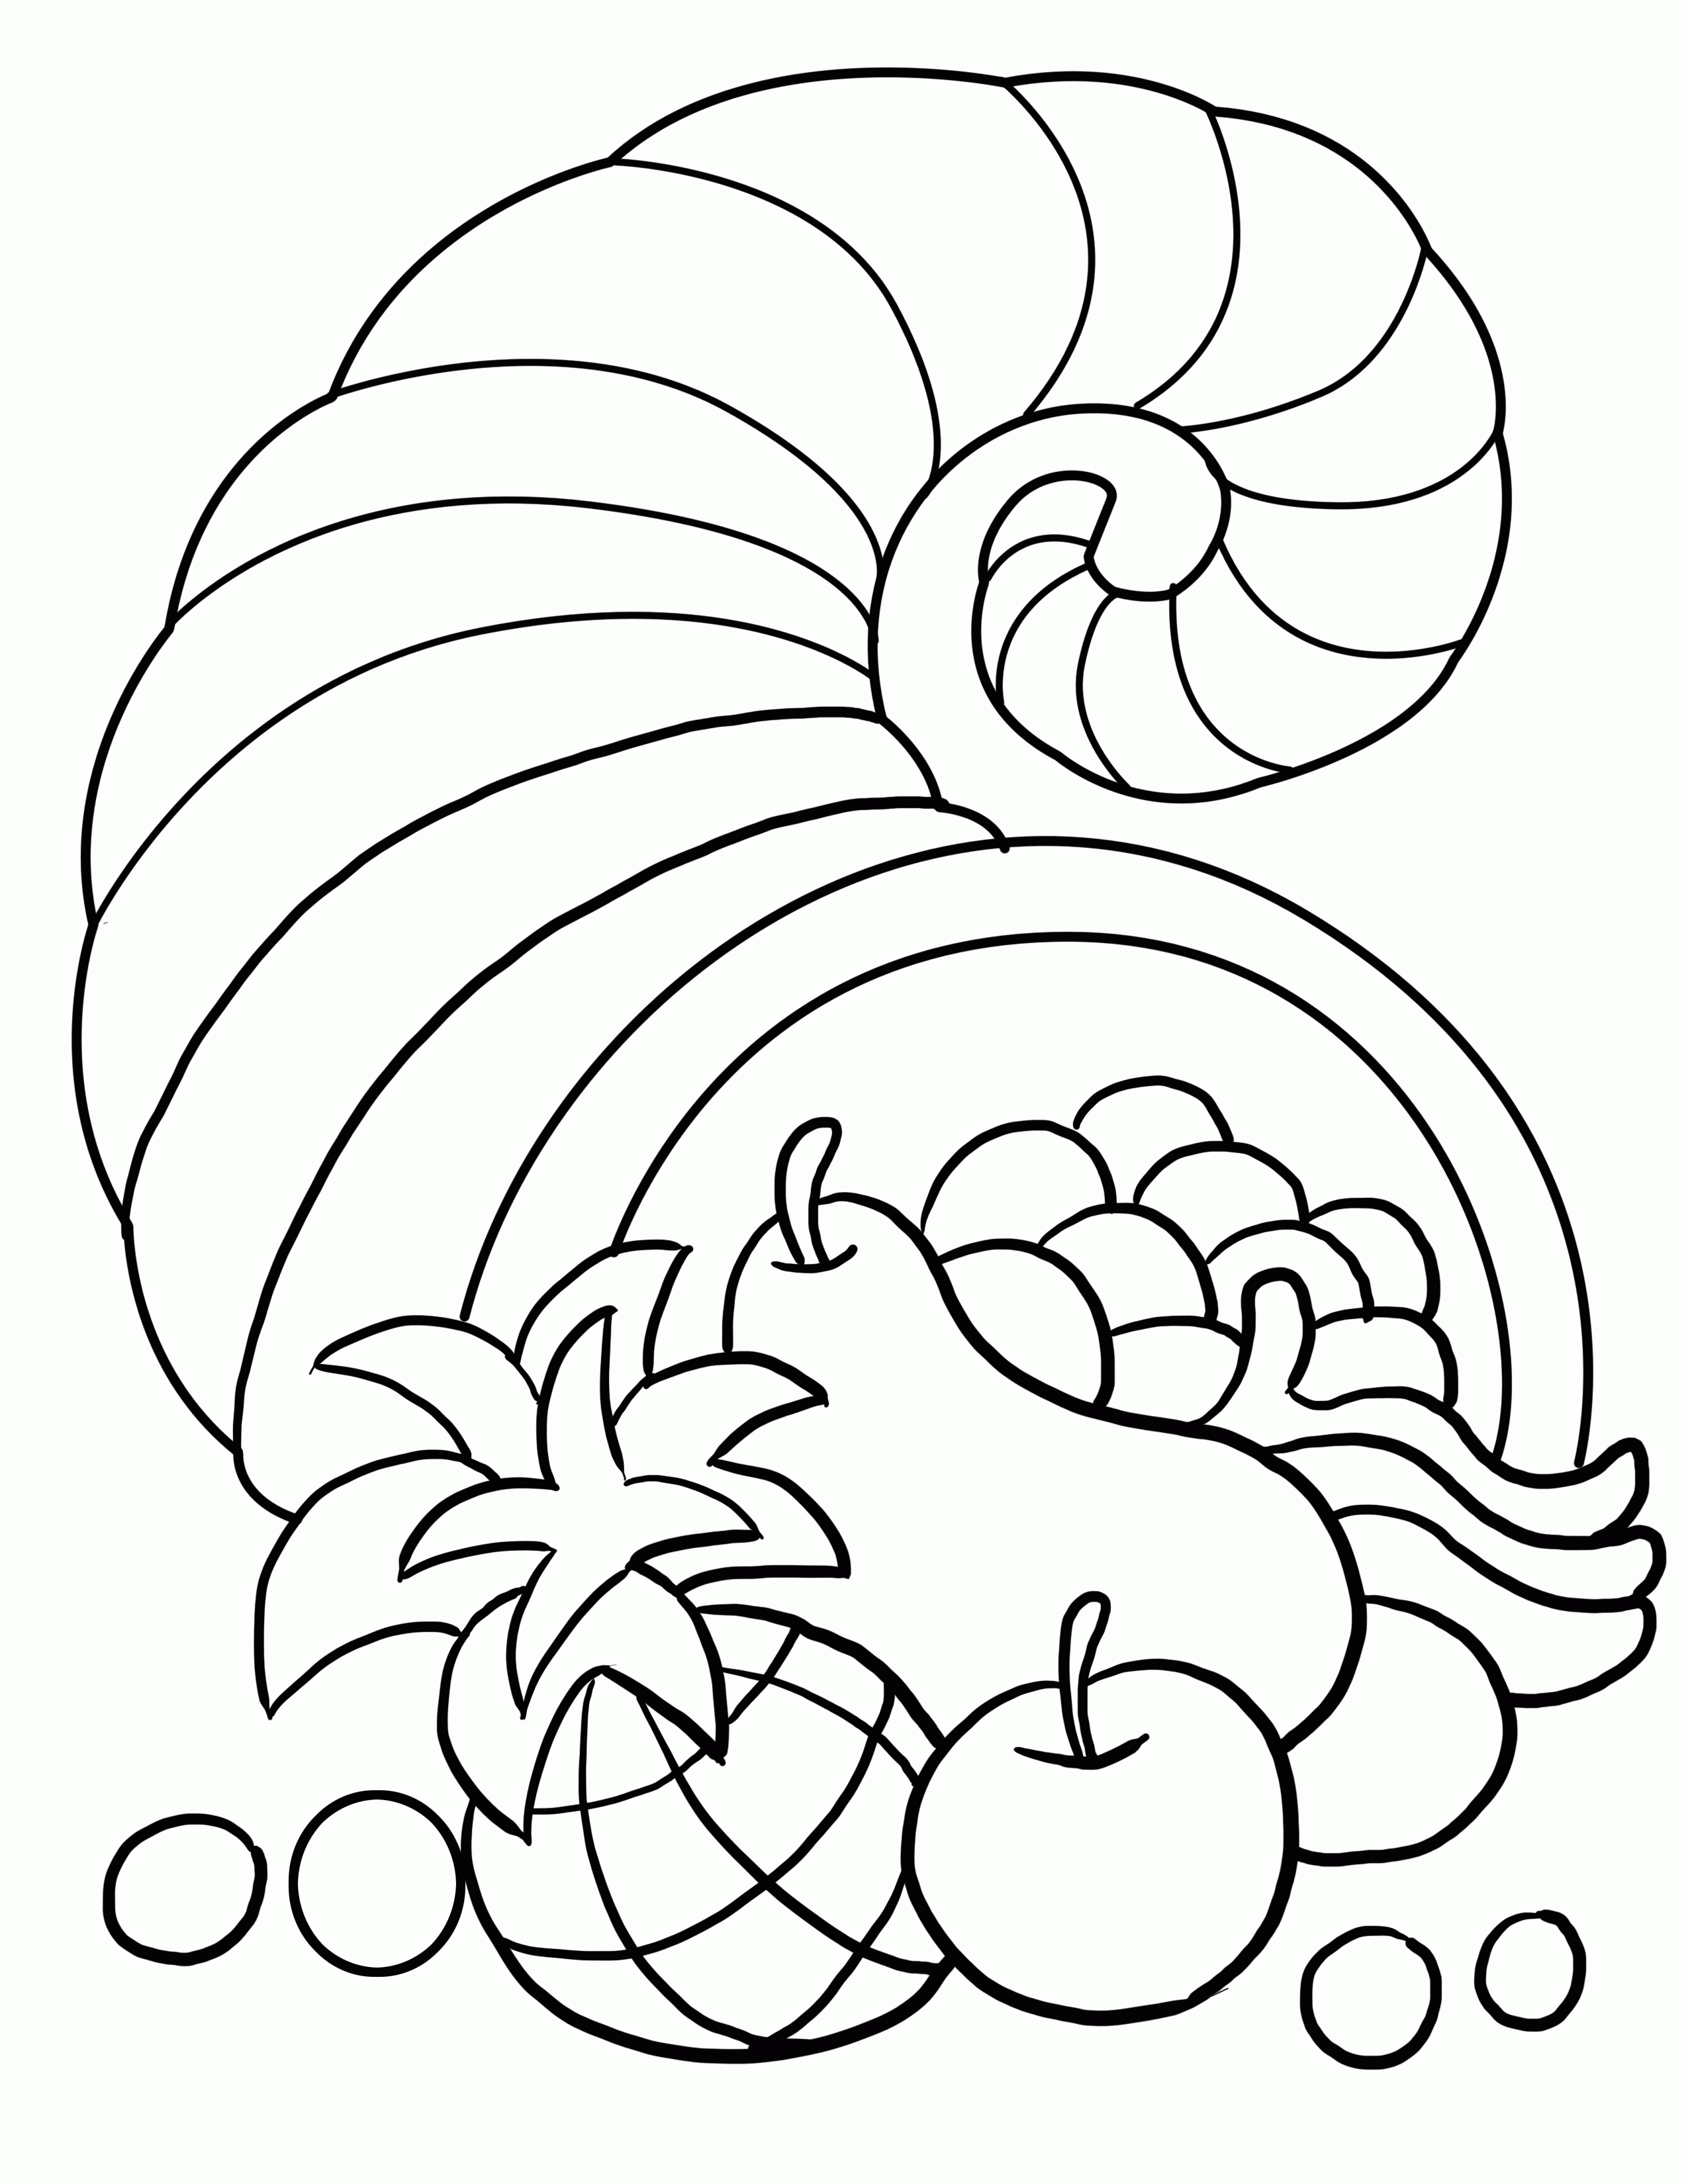 Disney Free Thanksgiving Coloring Pages - Coloring Home